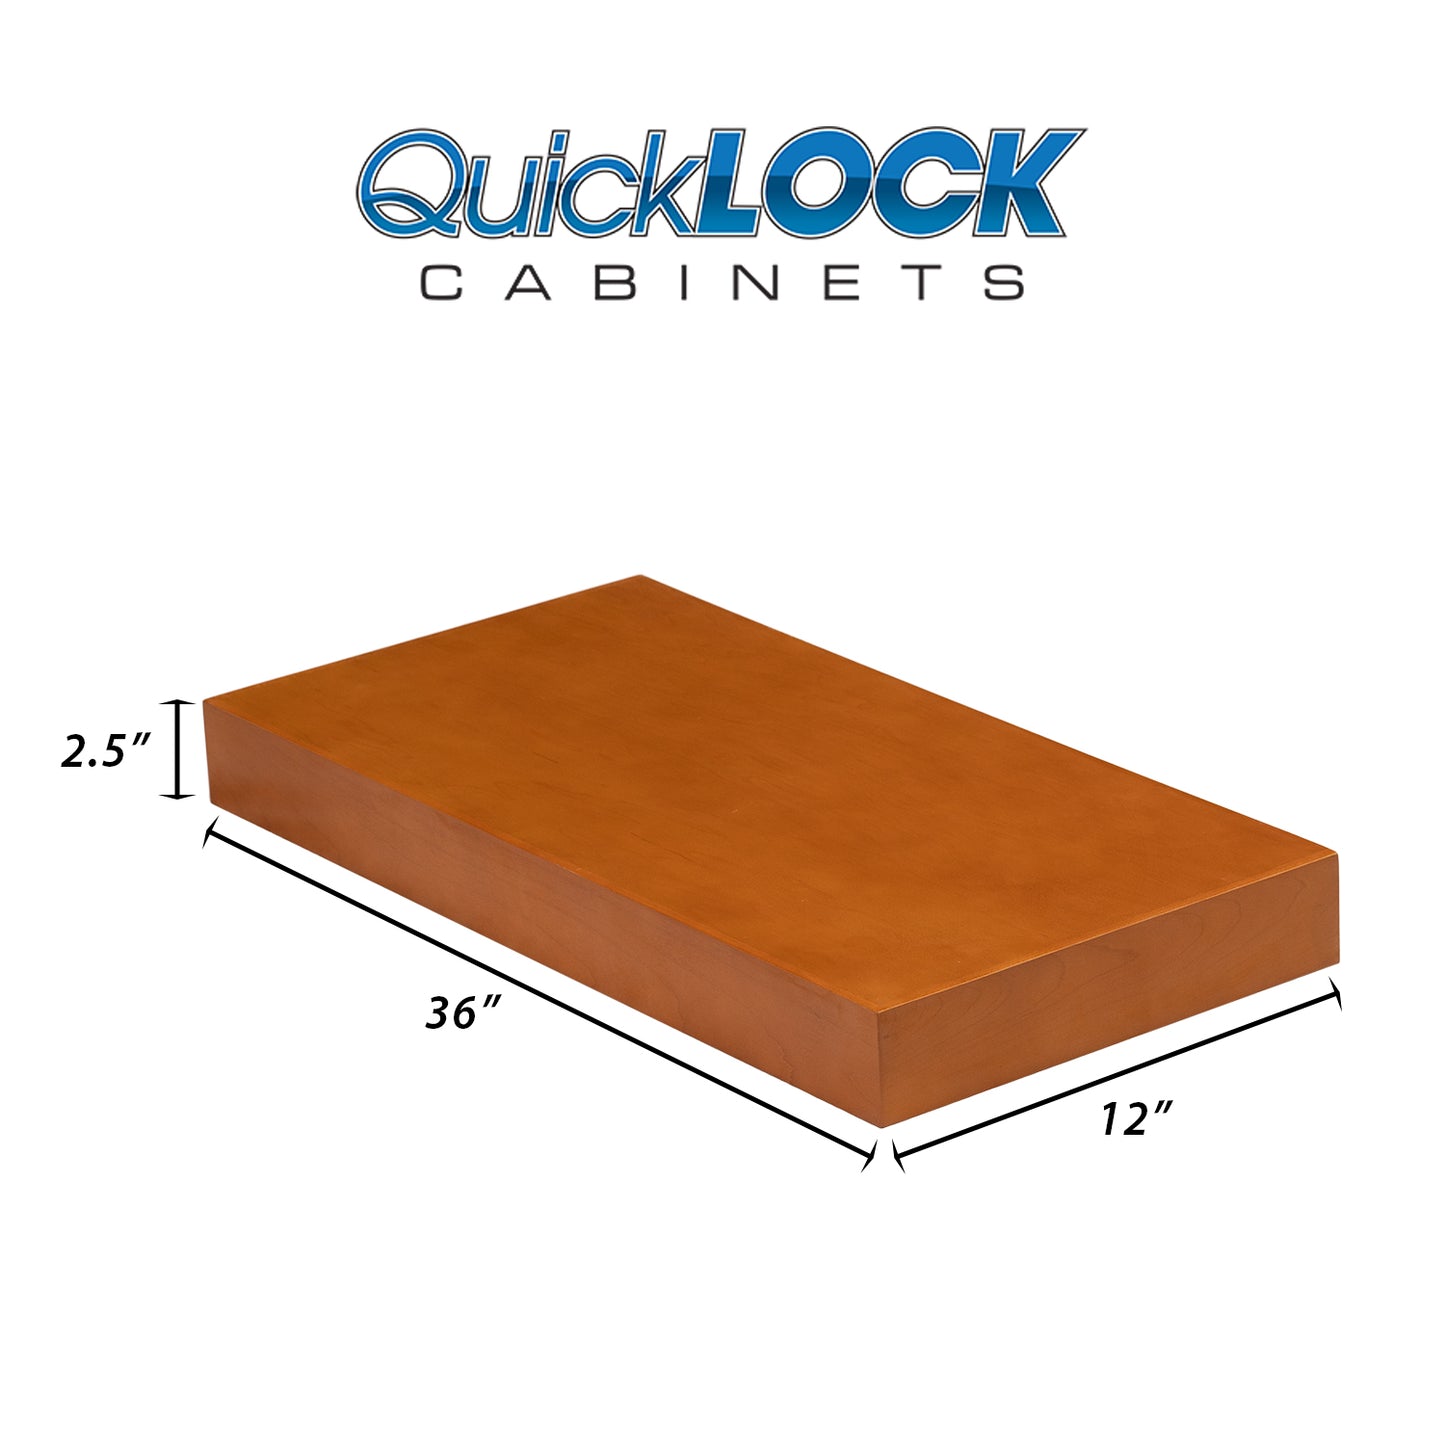 Quicklock Cabinets Floating Shelves | 2.5" Thick | Provincial Stain, 12" D x 36" W x 2.5" H | American Made | Hardwood Bracket | Complete Shelf Unit